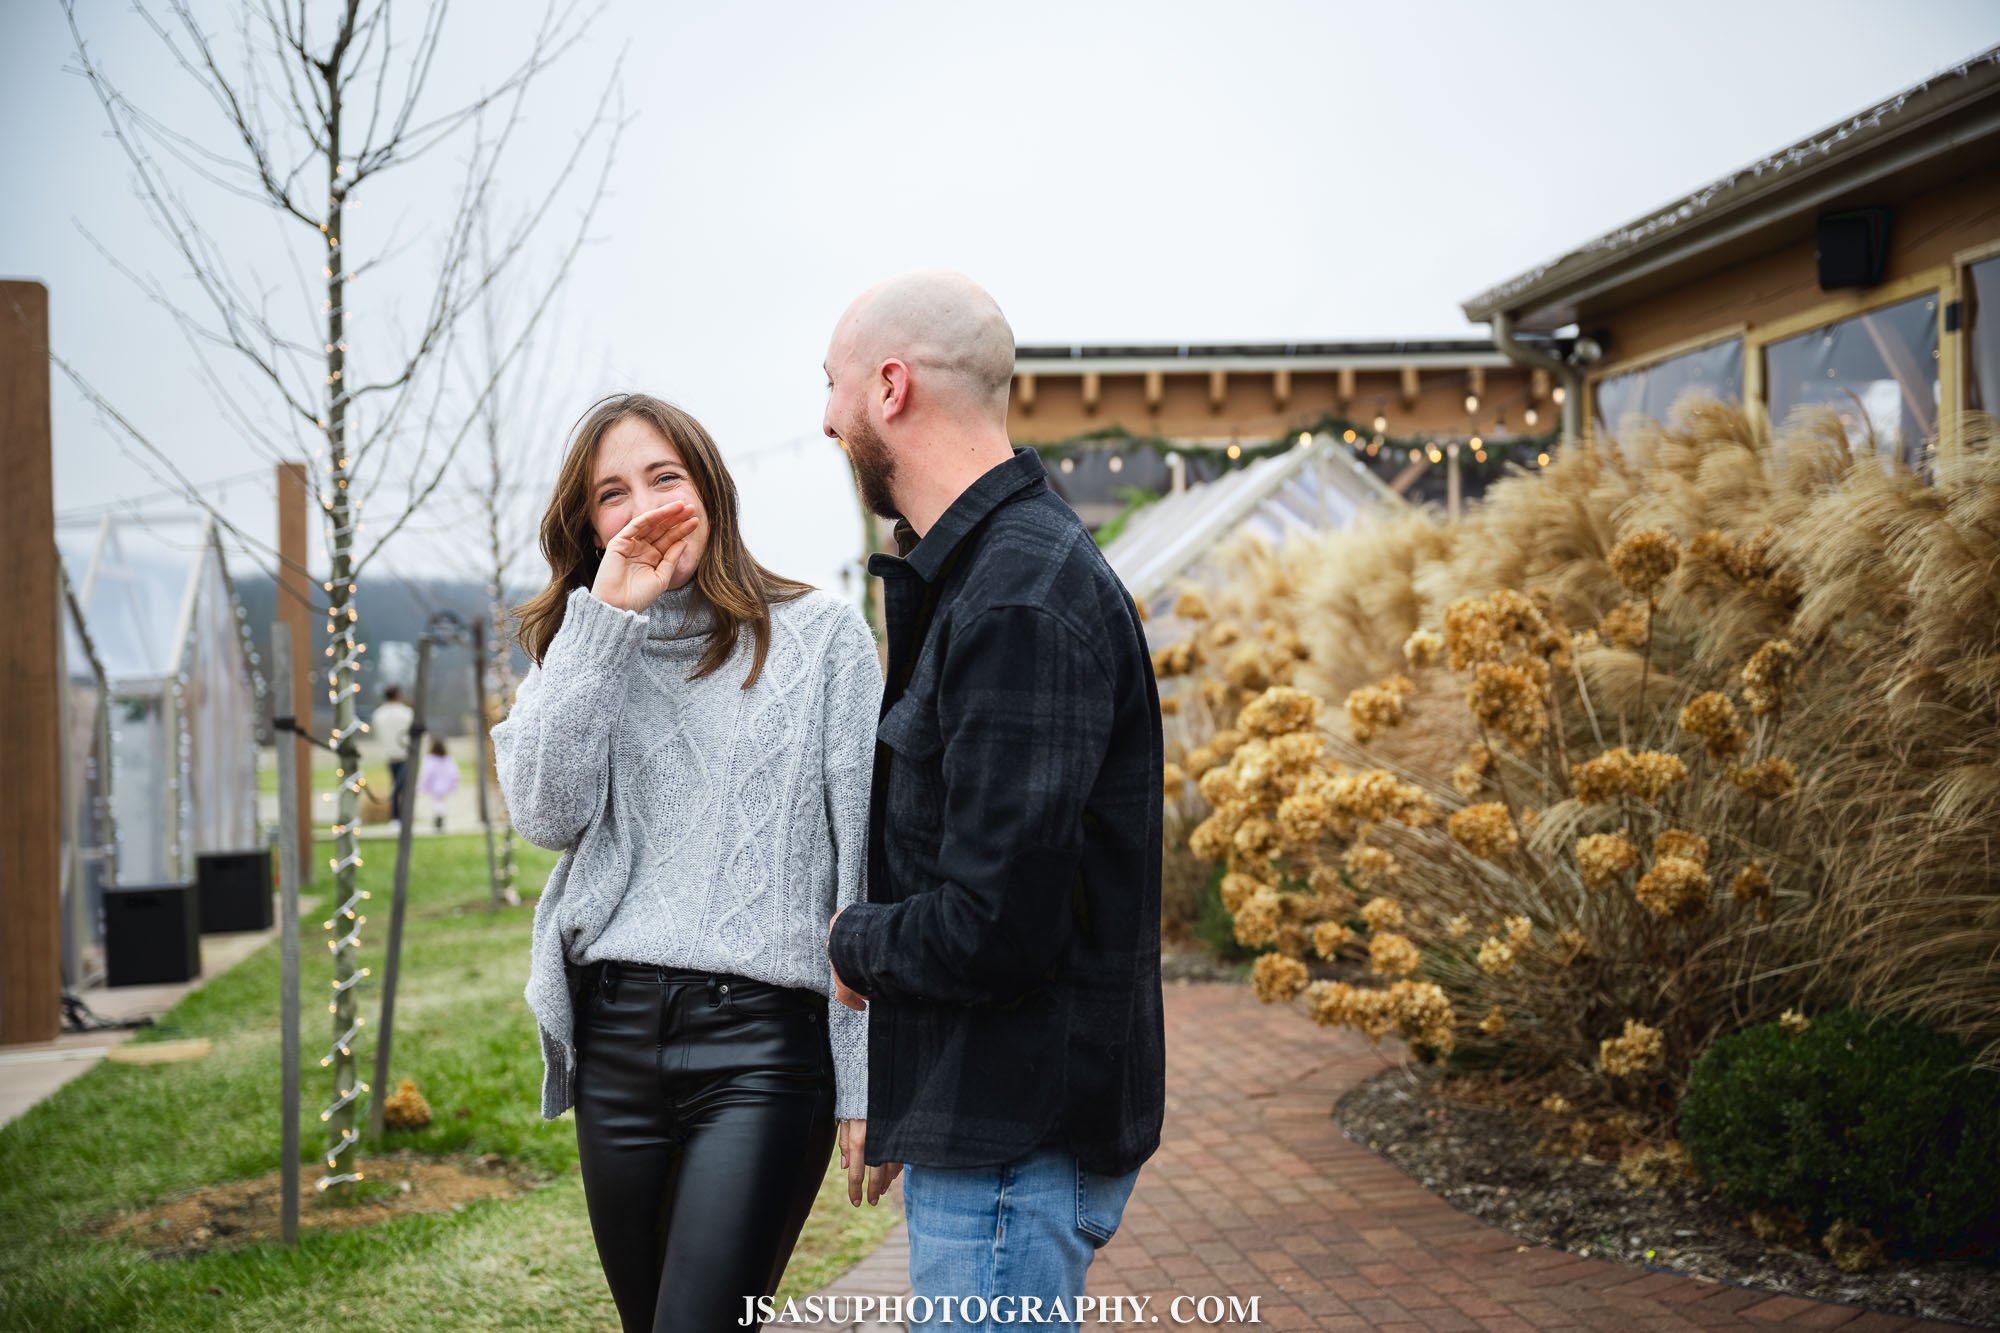 drew-alex-surprise-proposal-photos-old-westminister-winery-jsasuphotography-10.jpg